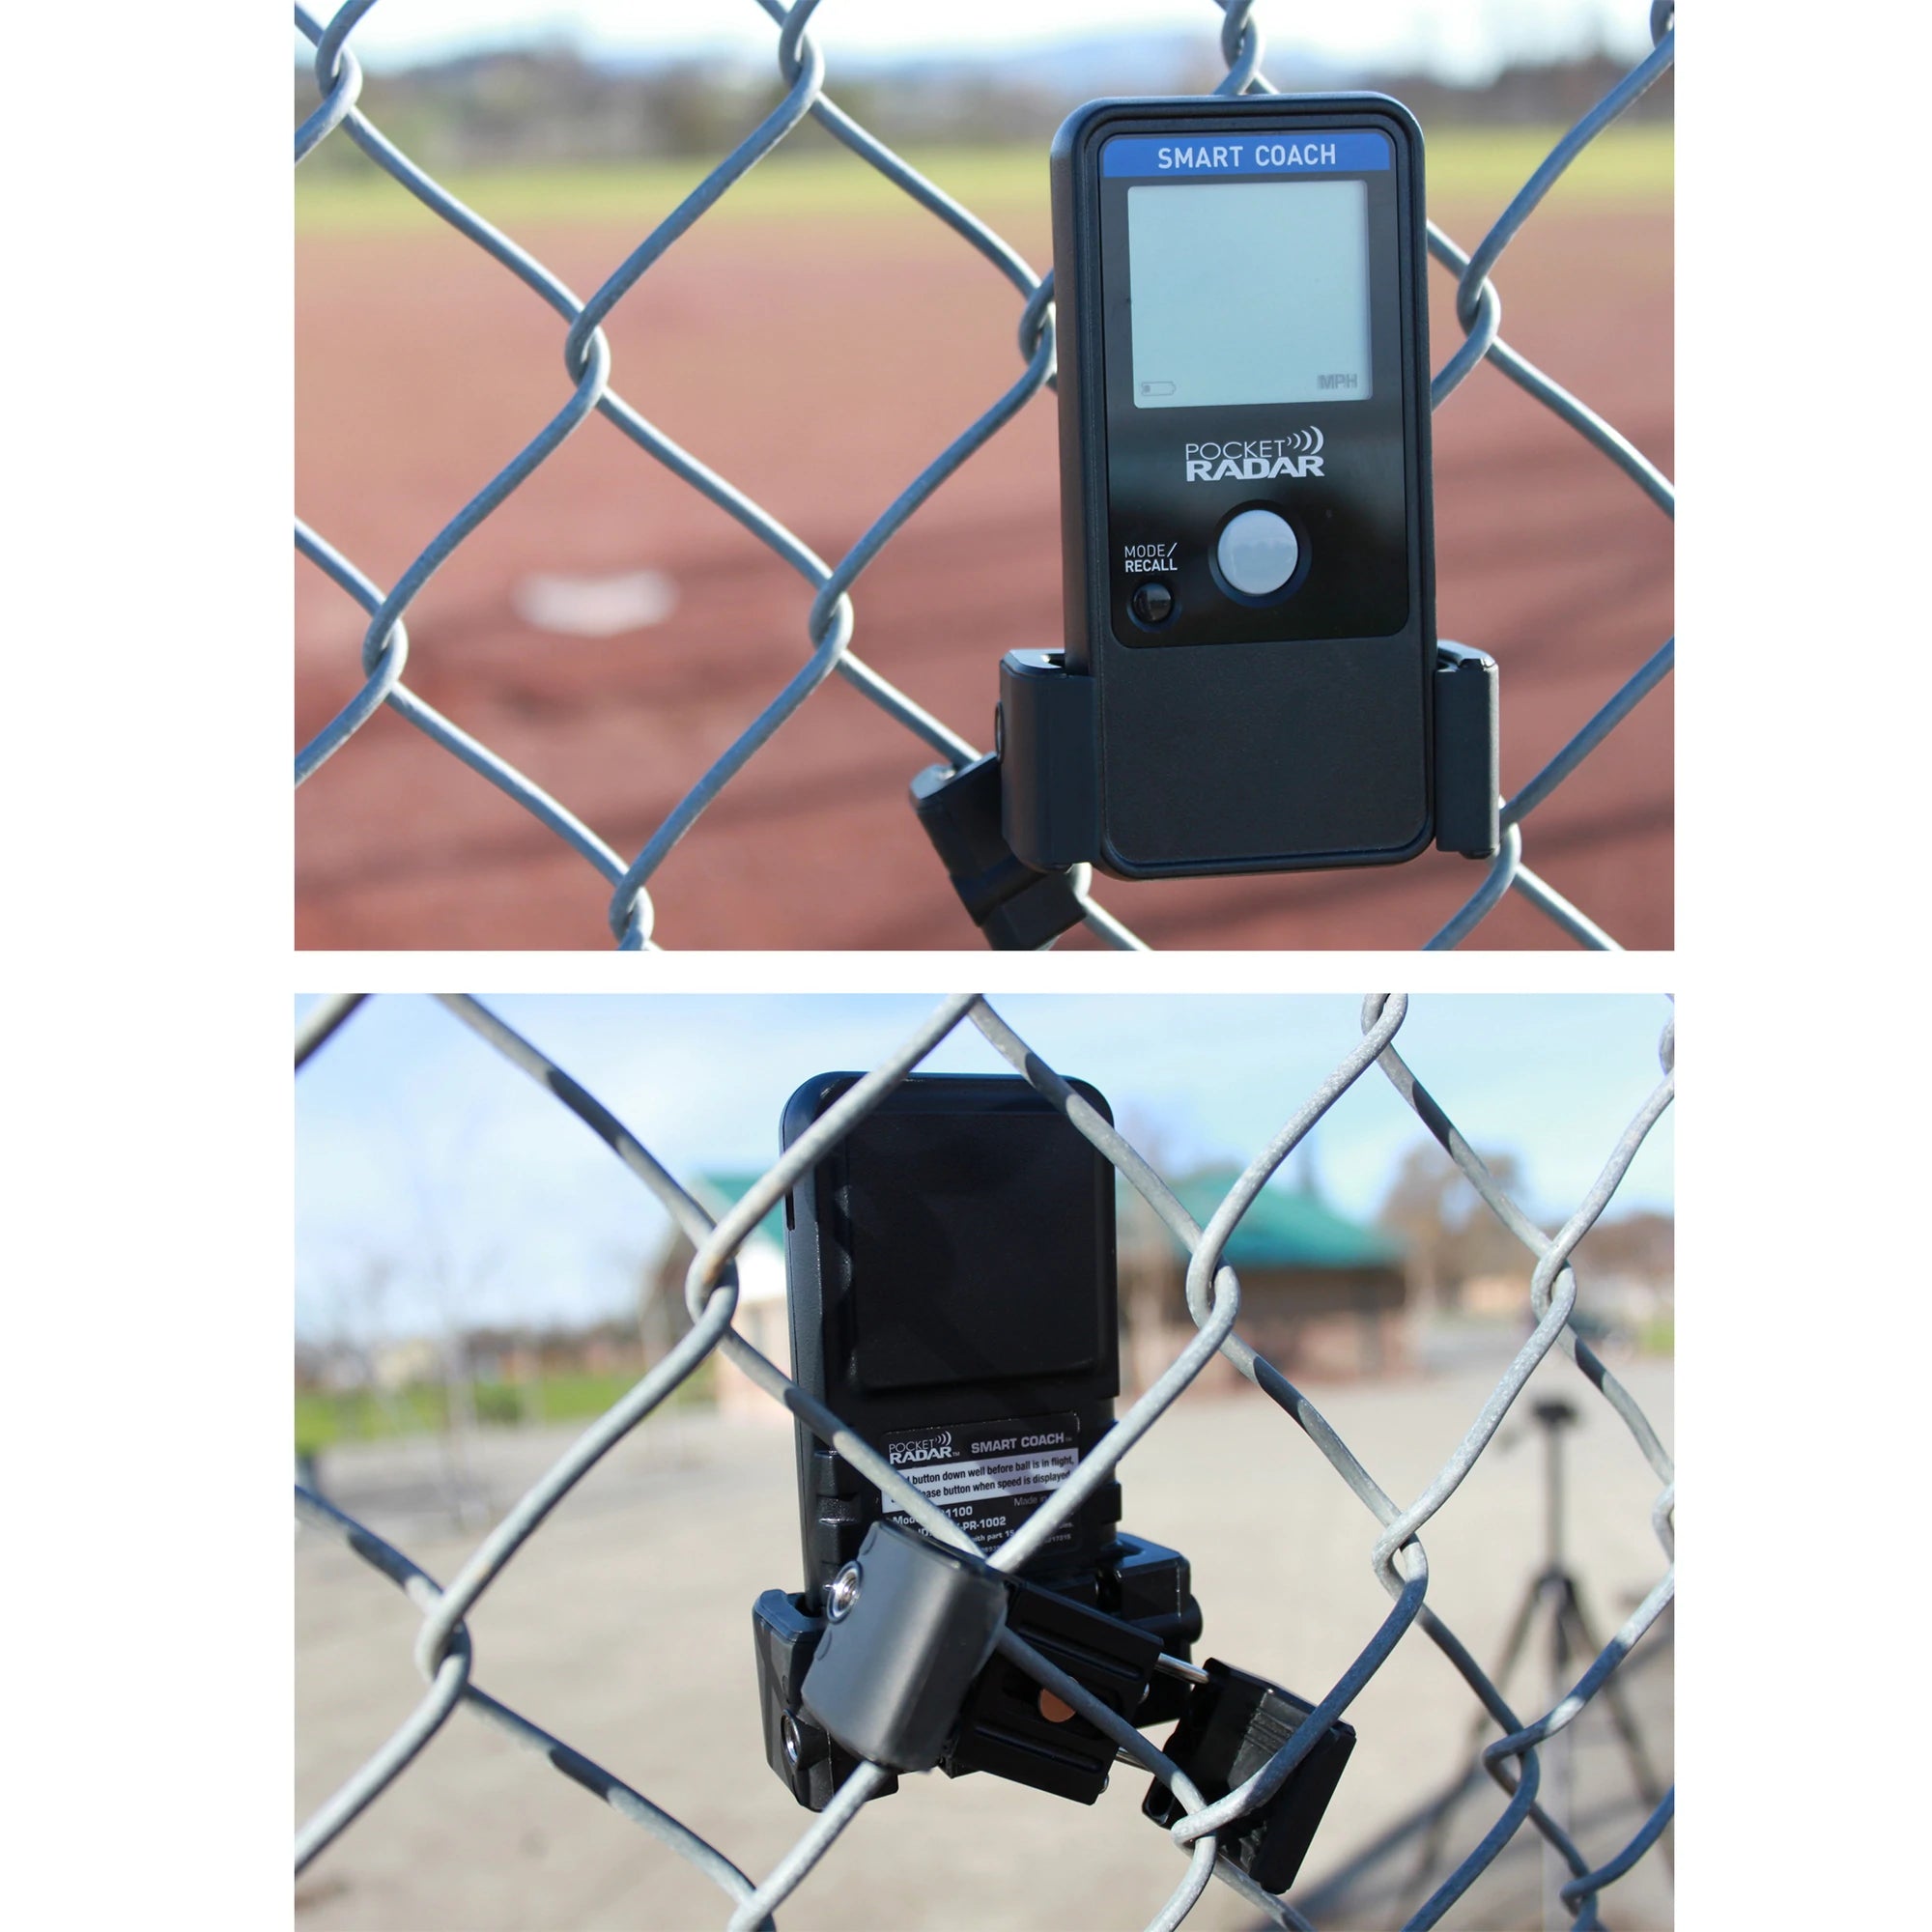 Universal Mount with Pocket Radar and Phone Attached In the Field